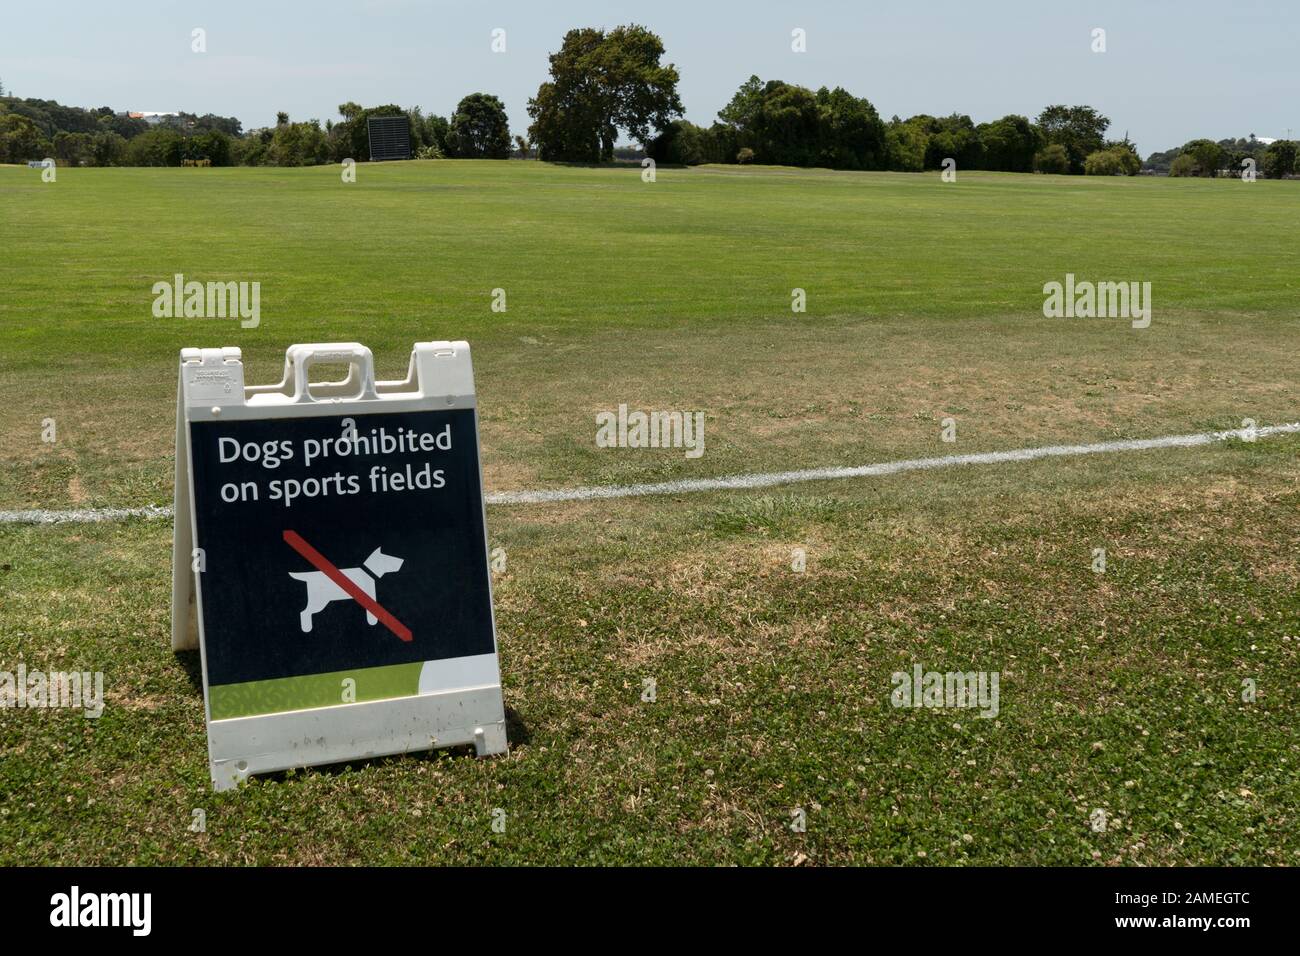 Dogs prohibited on sports field portable plastic sign grass cricket pitch Parnell cricket club, Parnell, Auckland, New Zealand. Stock Photo